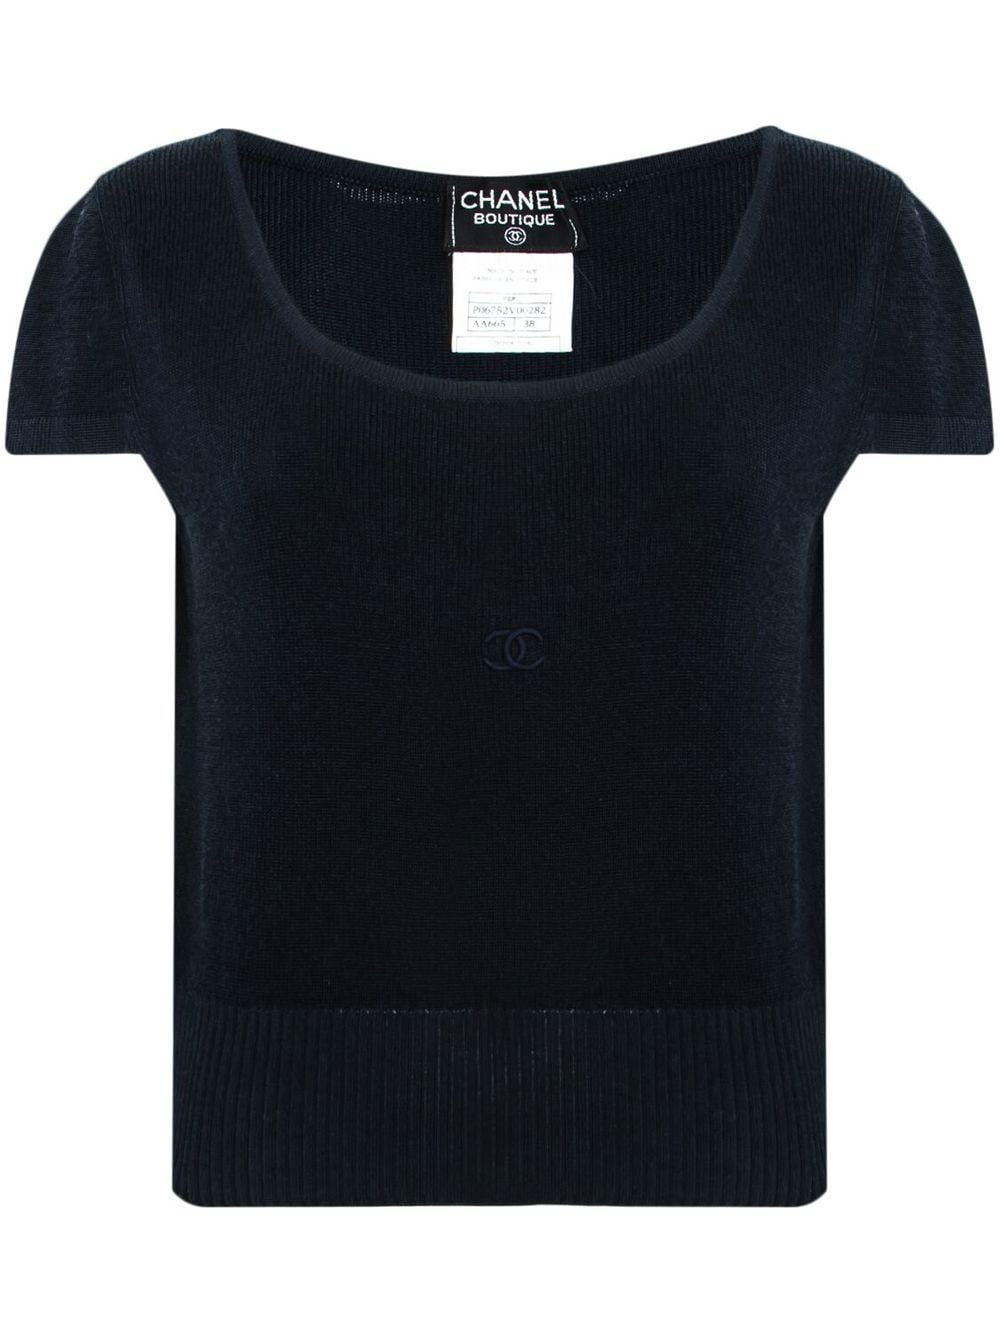 Chanel Pre-Owned 1996-1997 logo knit top